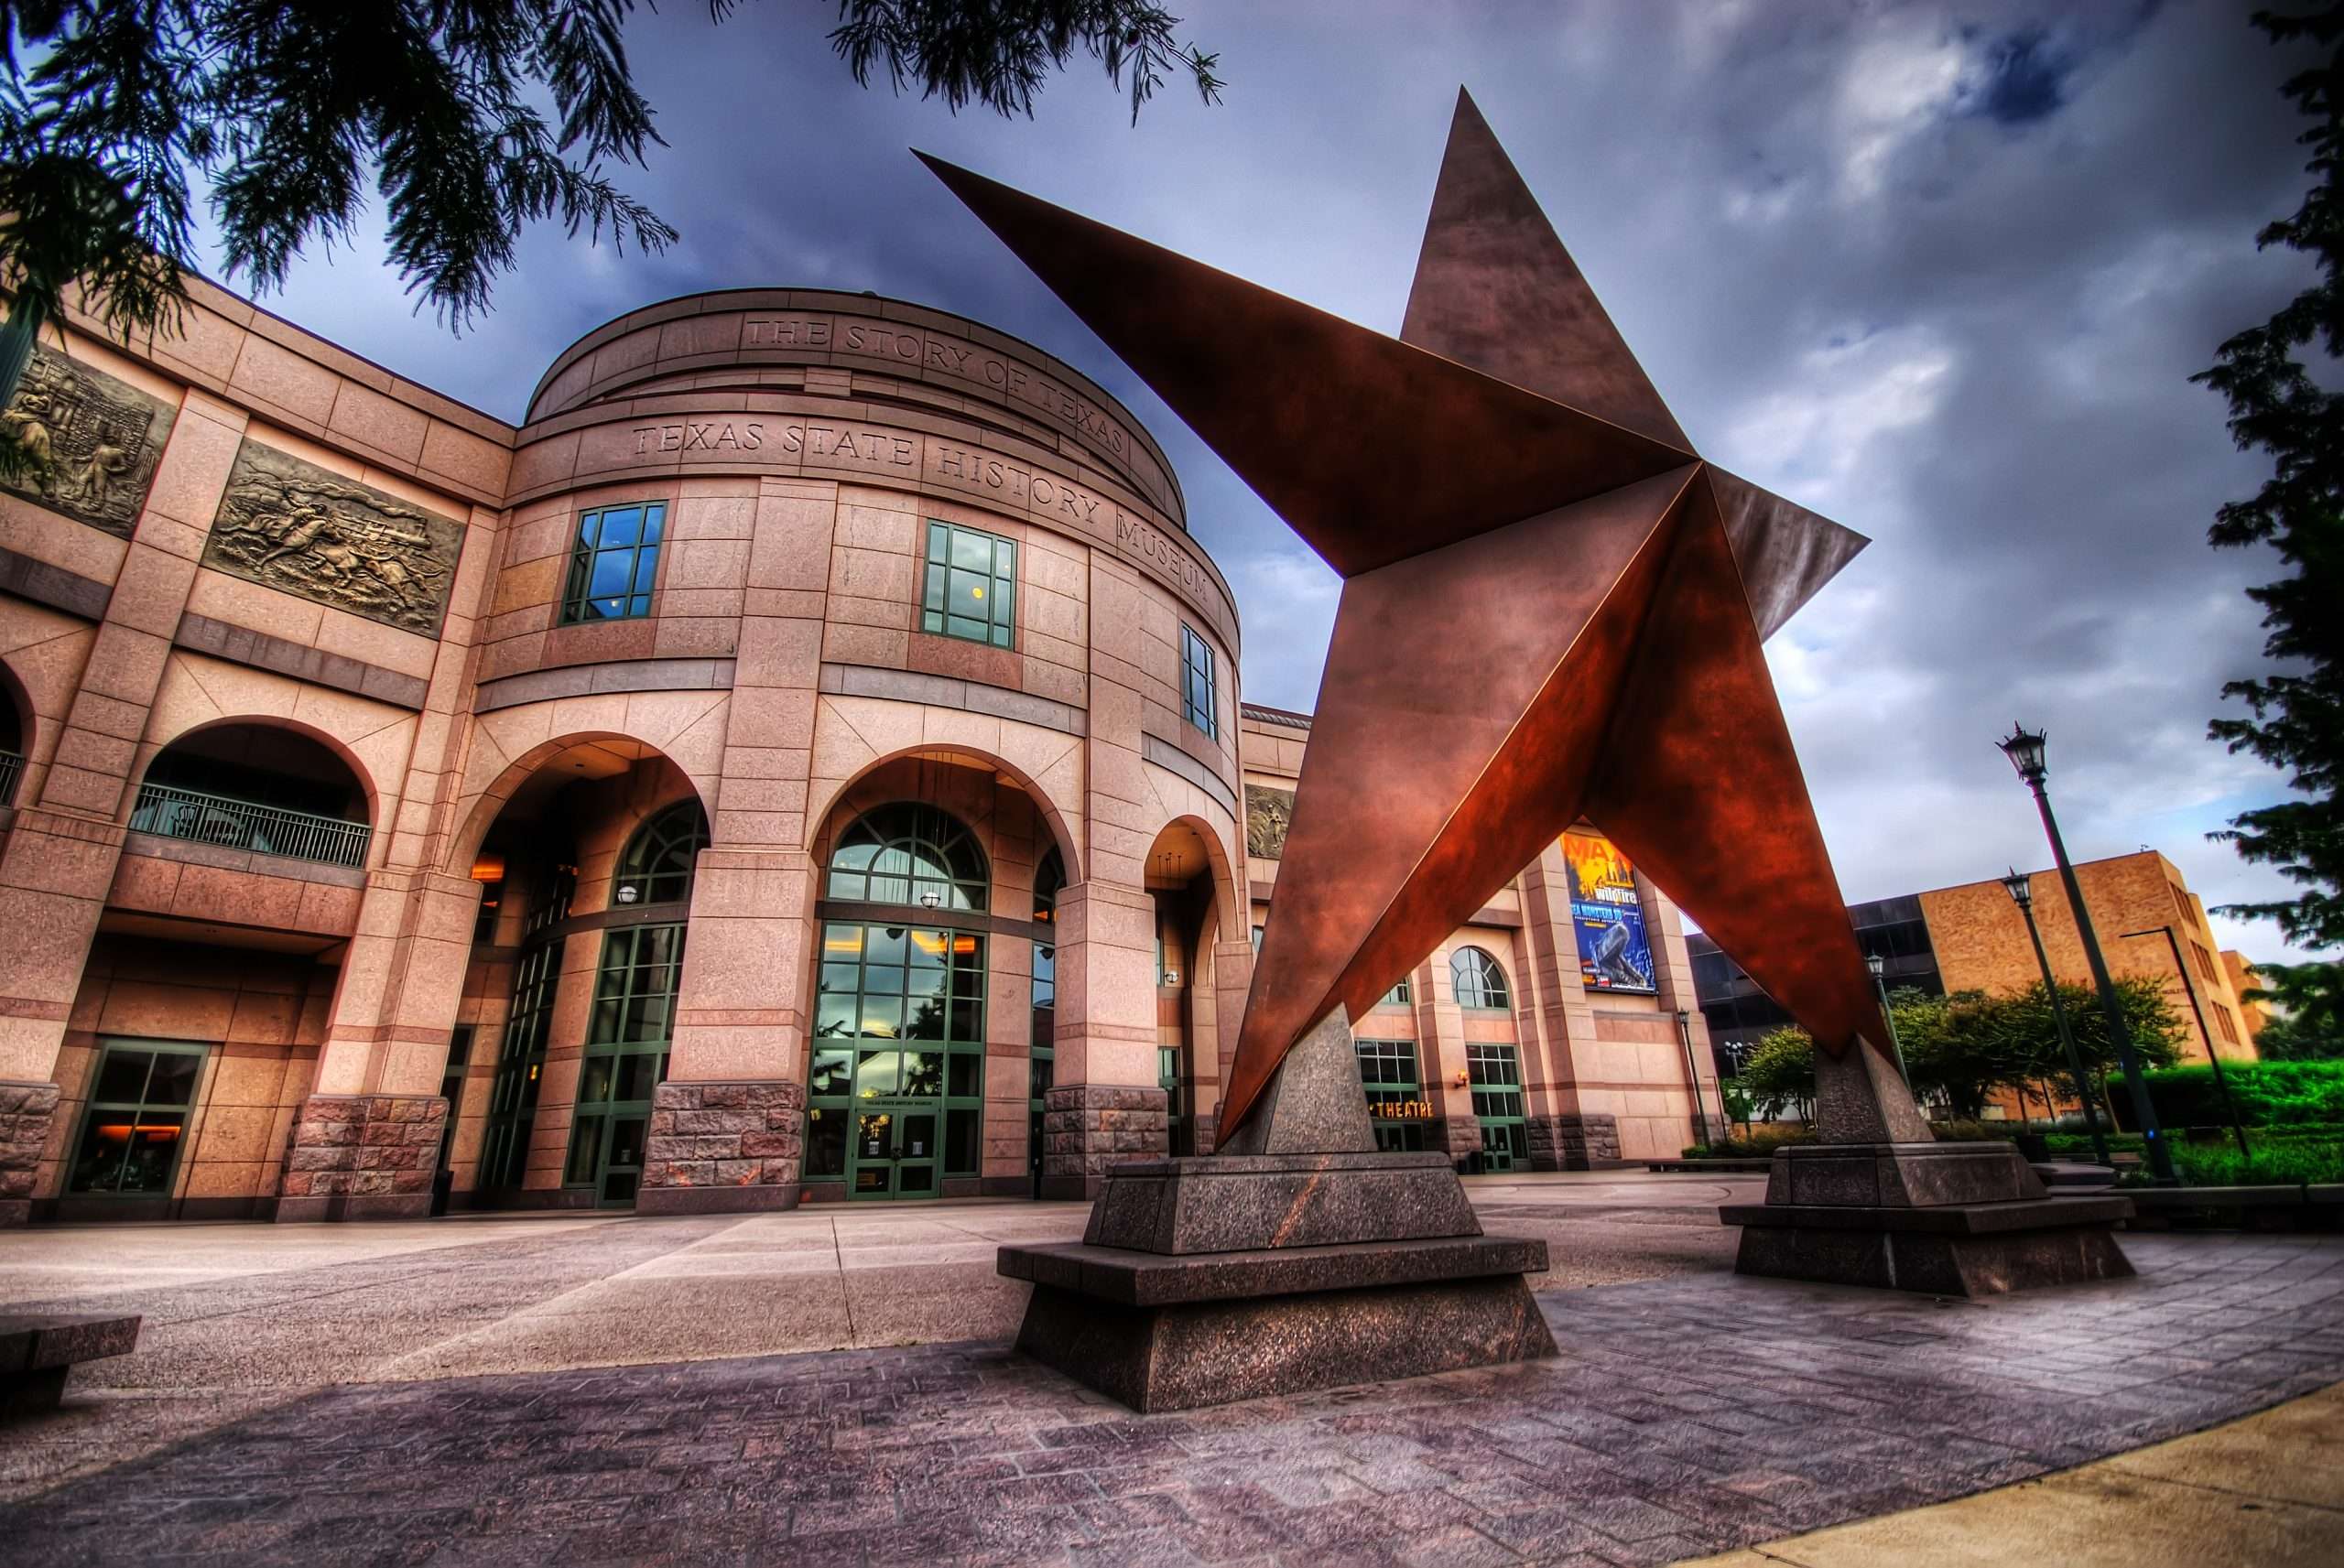 Top 5 Reasons to Visit The Texas State History Museum